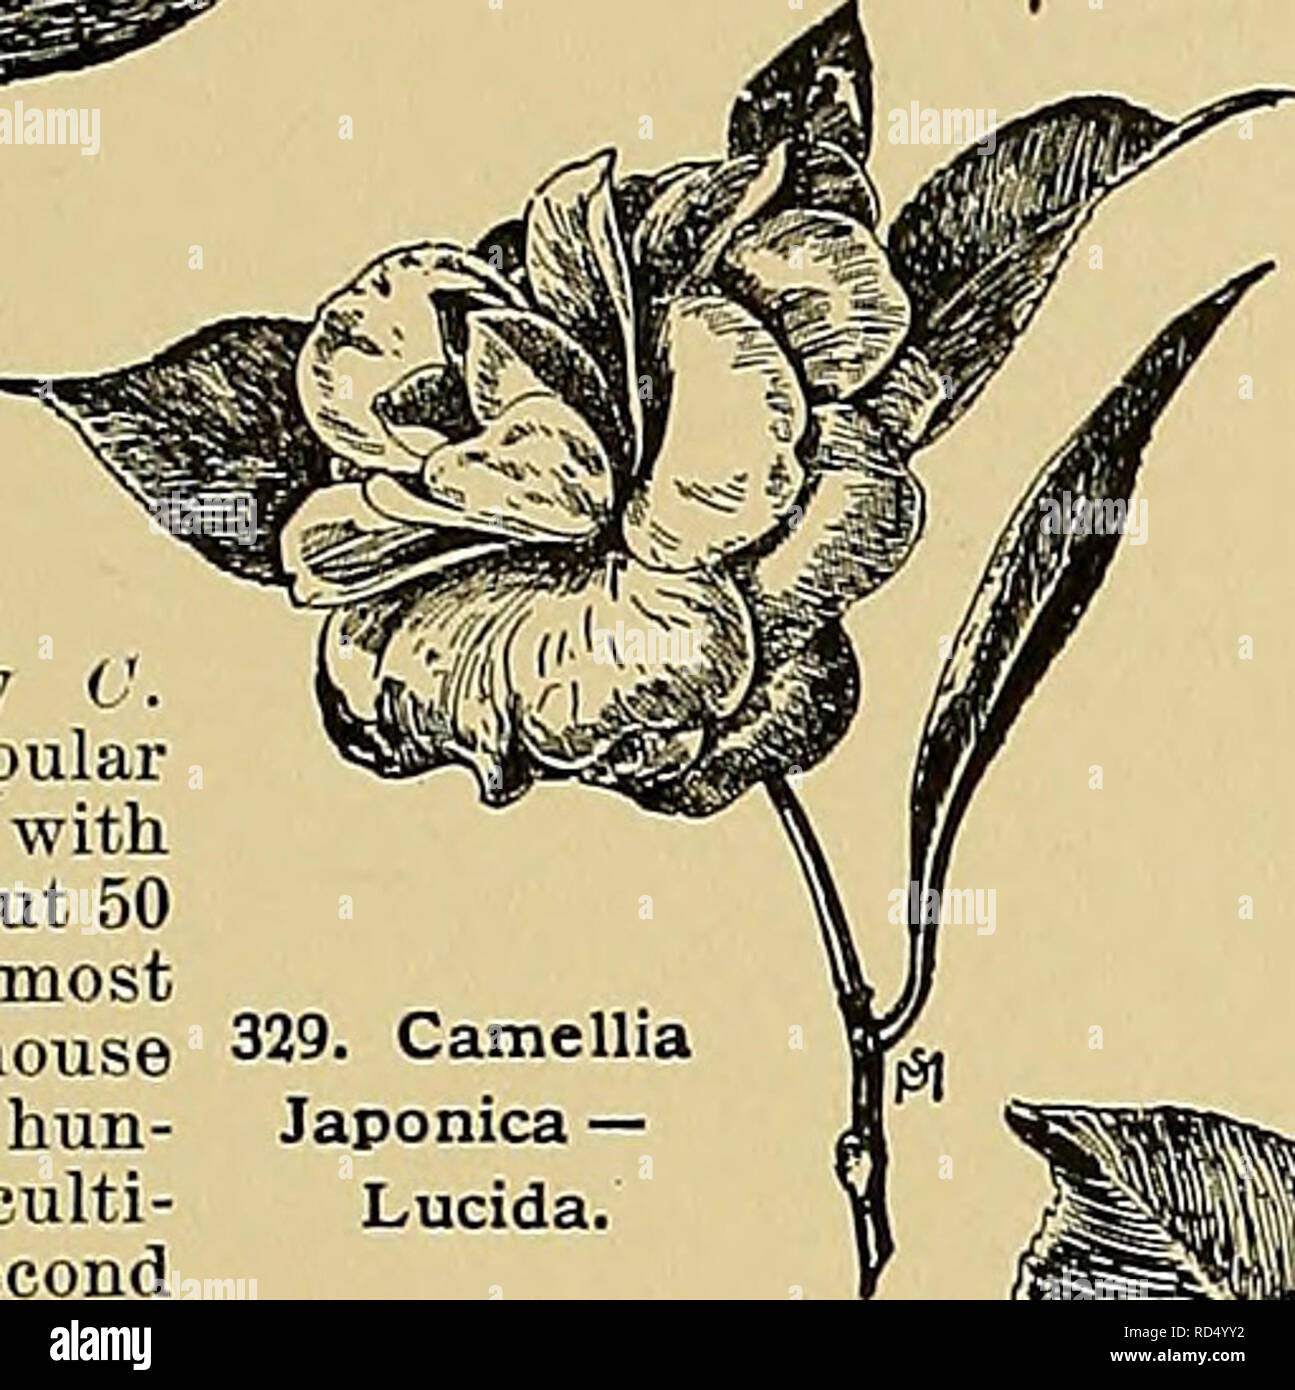 . Cyclopedia of American horticulture, comprising suggestions for cultivation of horticultural plants, descriptions of the species of fruits, vegetables, flowers, and ornamental plants sold in the United States and Canada, together with geographical and biographical sketches. Gardening. 339. Camellia Japonica — Lucida. CAMELLIA (after George Joseph Kamel or Camellus, a Moravian Jesuit, who traveled in Asia in the seventeenth century). Ternstrcemidcece. Evergreen trees or shrubs: Ivs. alternate, short-petioled, serrate: fls. large, axillary or terminal, usually solitary, white or red ; sepals a Stock Photo